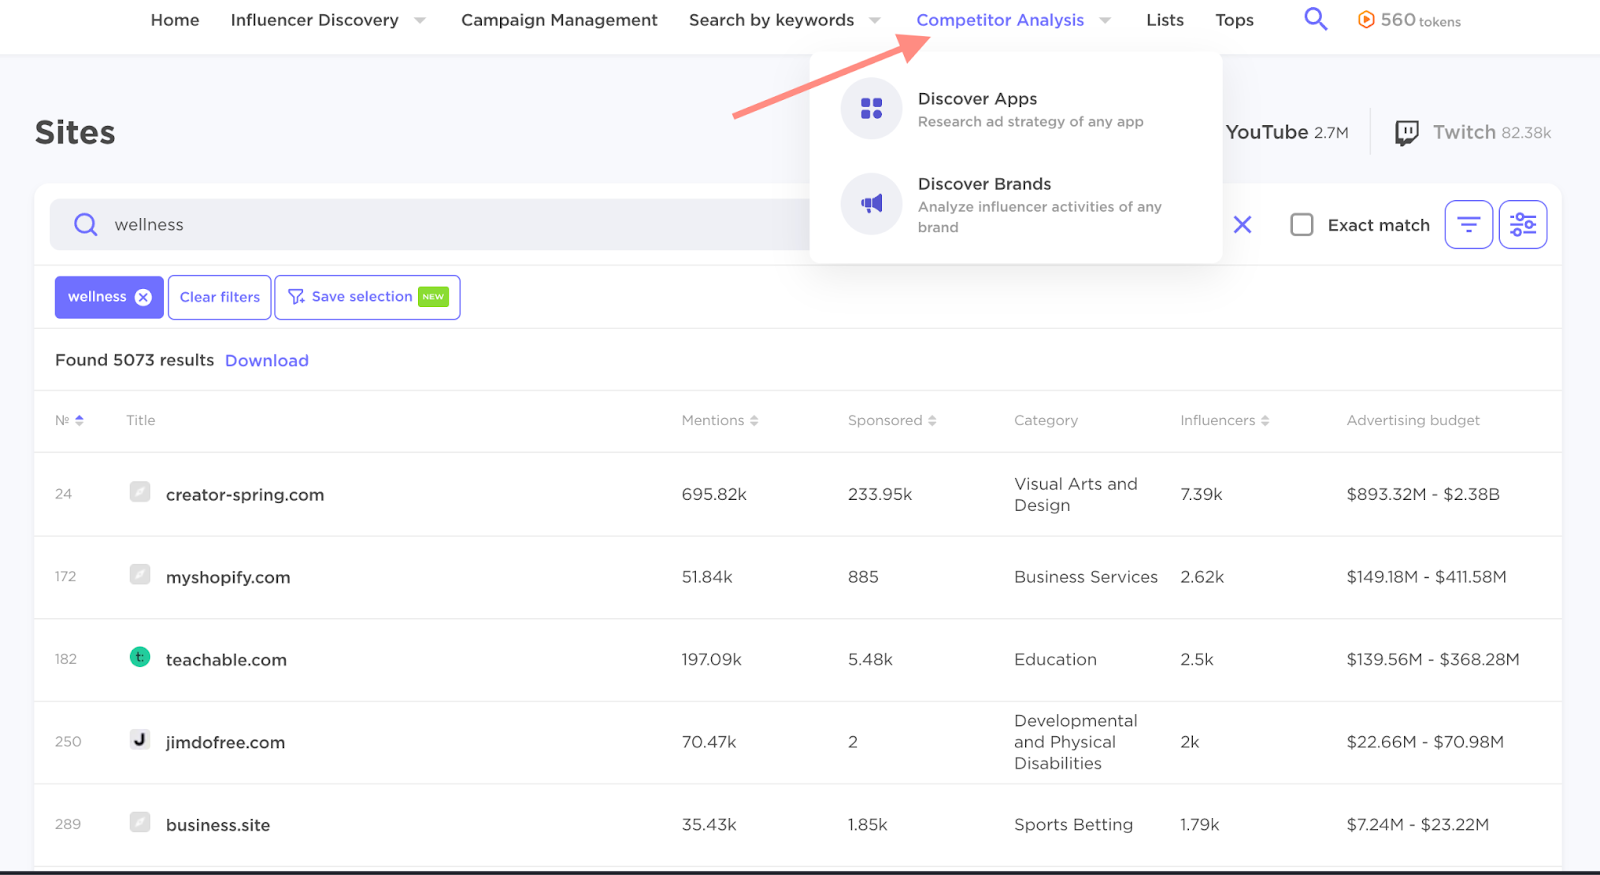 Image of Influencer Analytics competitor analysis page